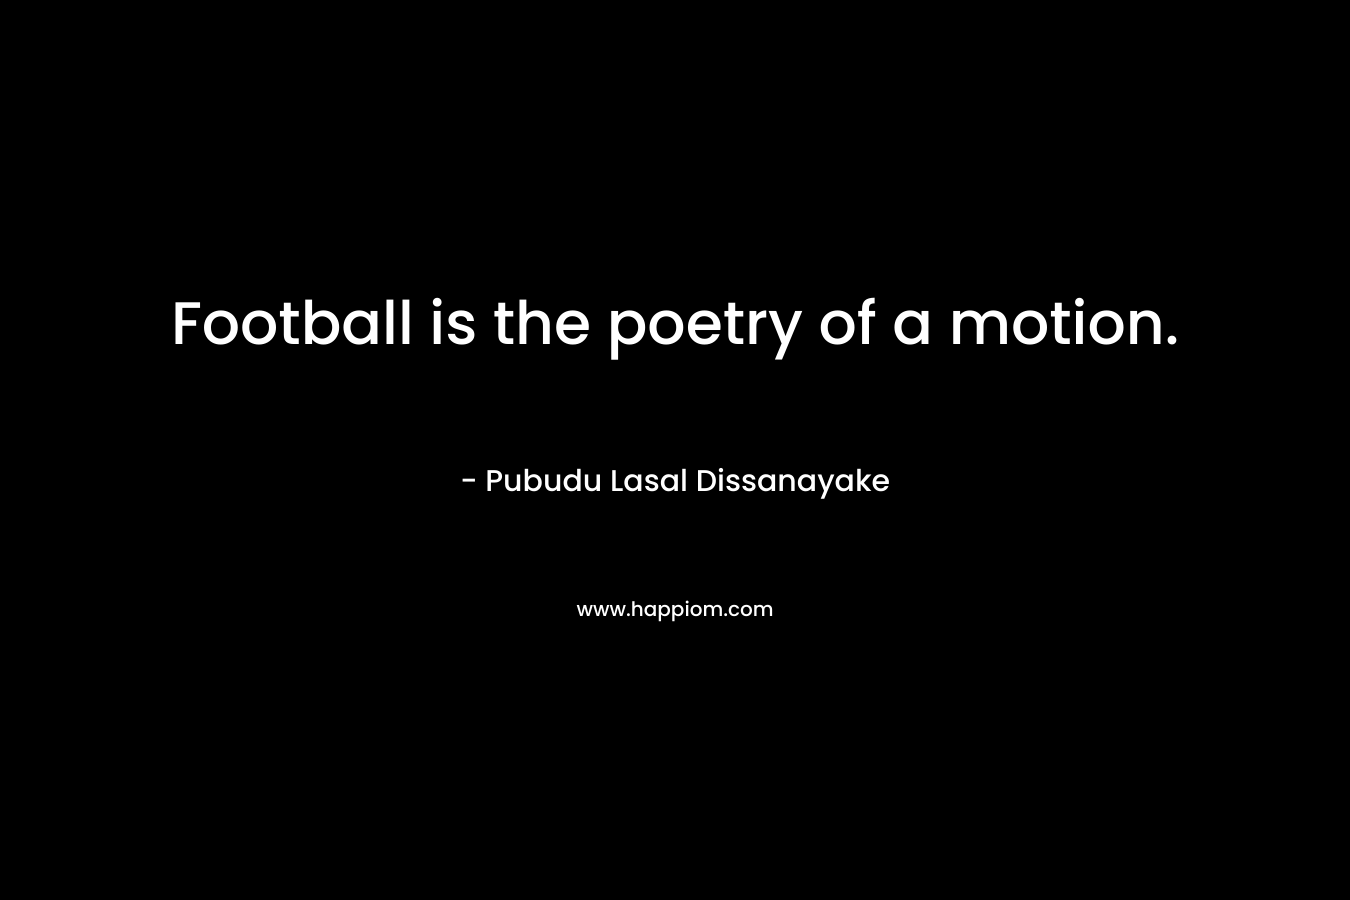 Football is the poetry of a motion. – Pubudu Lasal Dissanayake